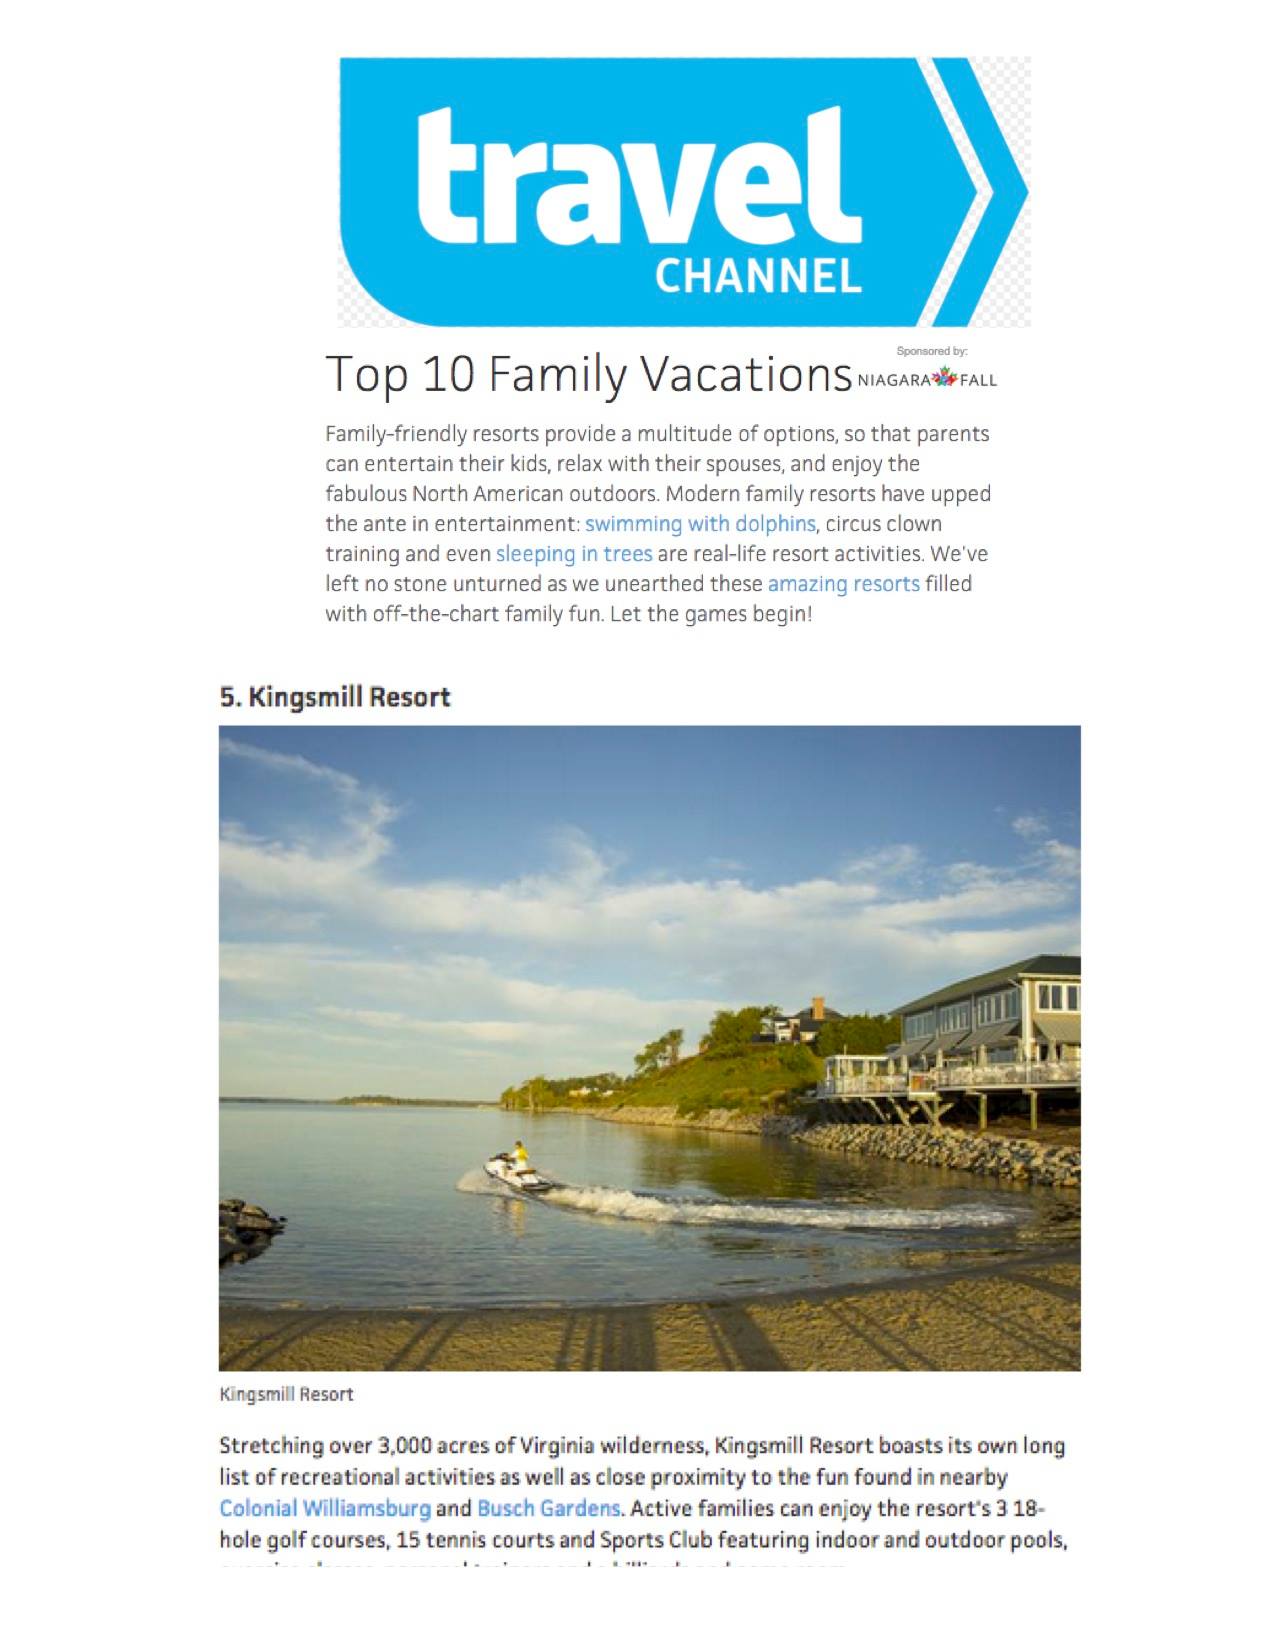 6.Kingsmill Resort in Travel Channel Family Vacation Round up.jpg